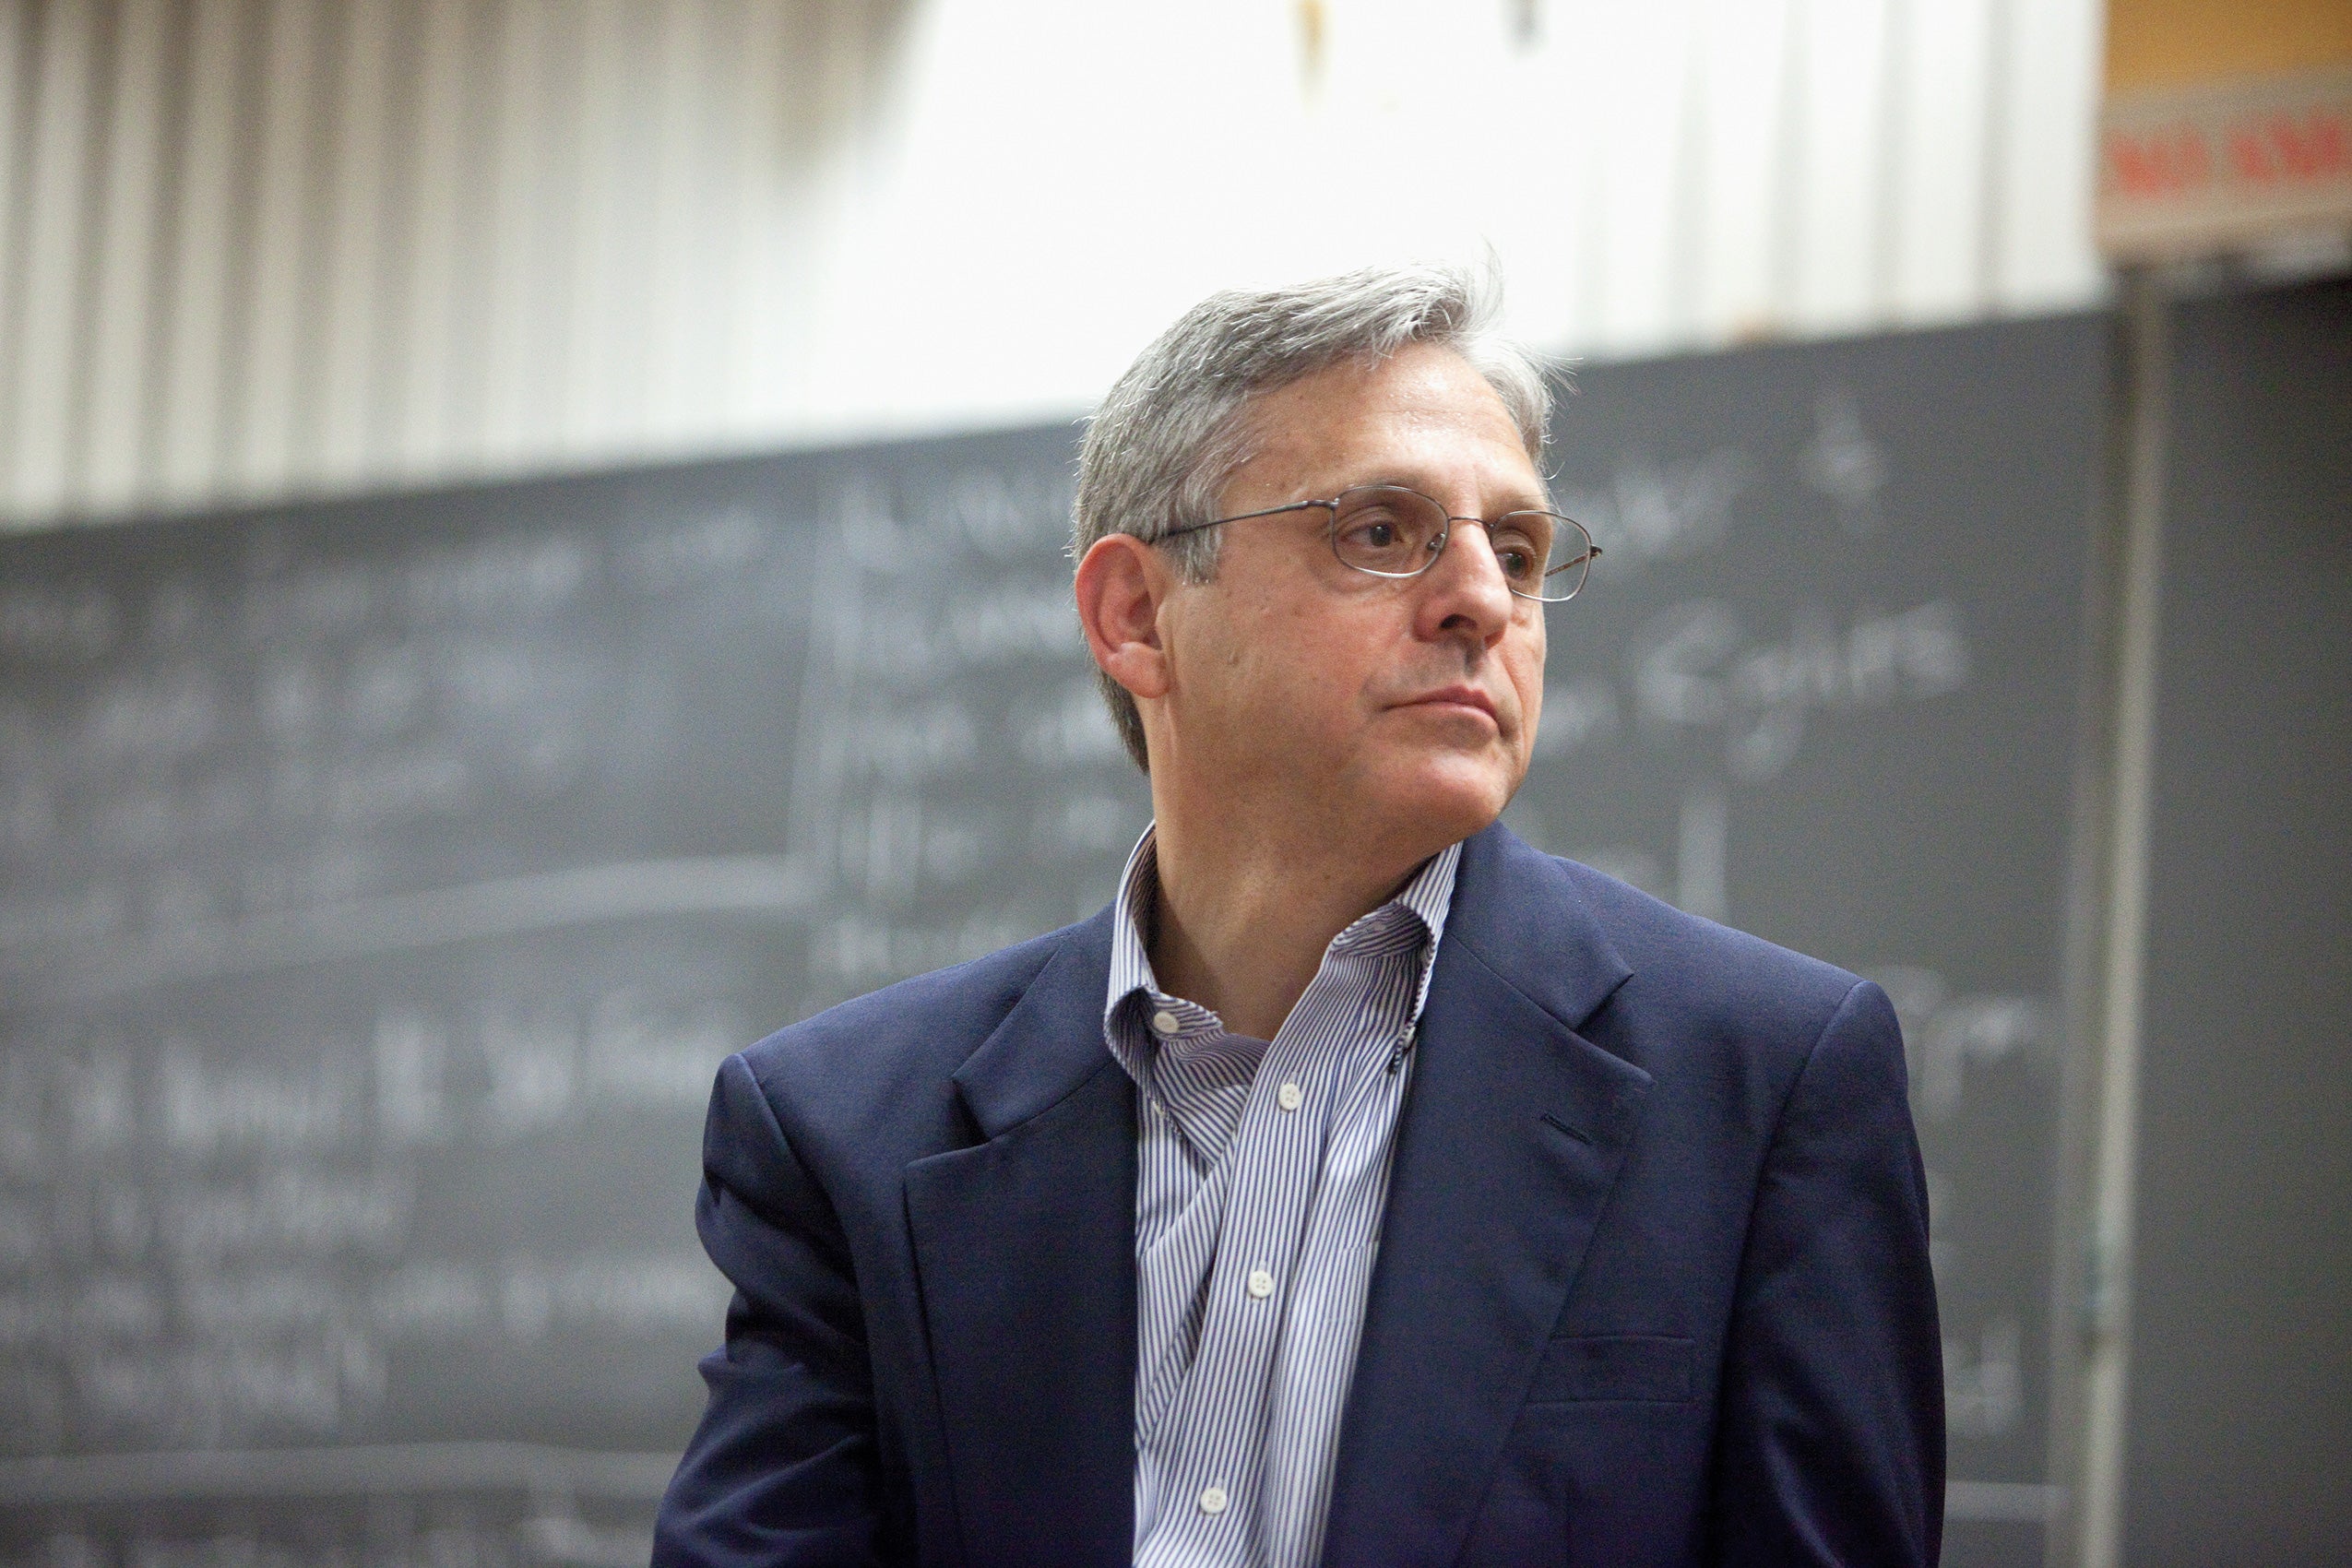 Merrick Garland looking to the right wearing a blue blazer in front of a chalk board